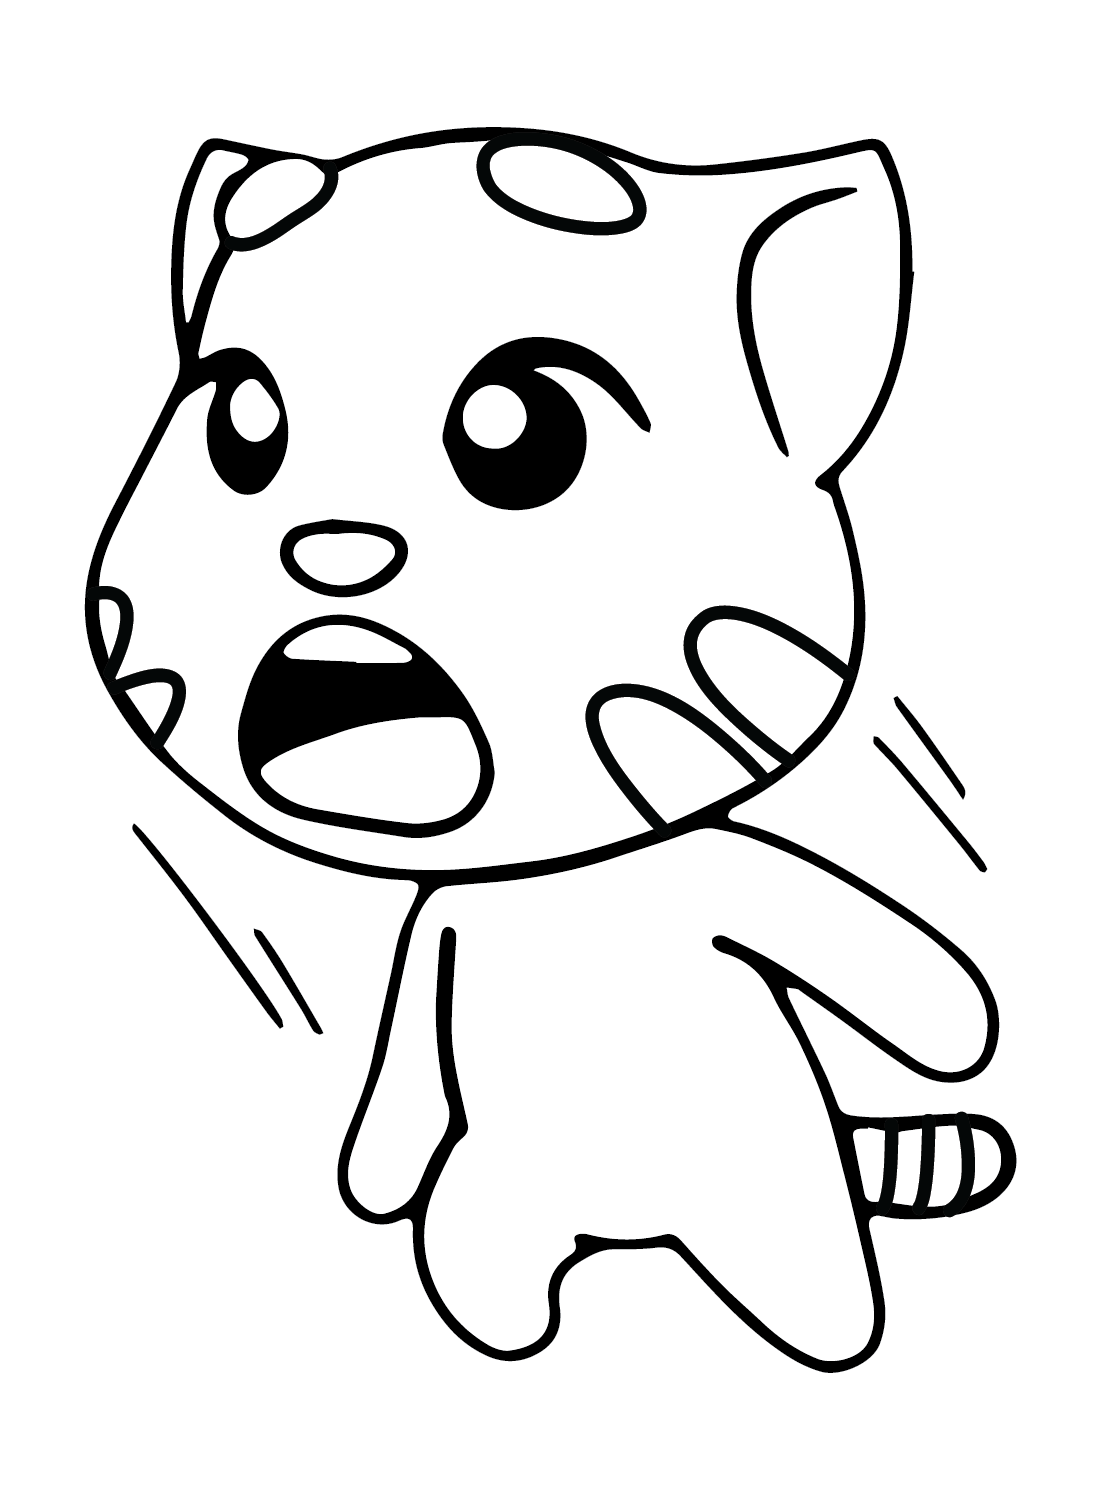 Talking Tom Cat Coloring Page